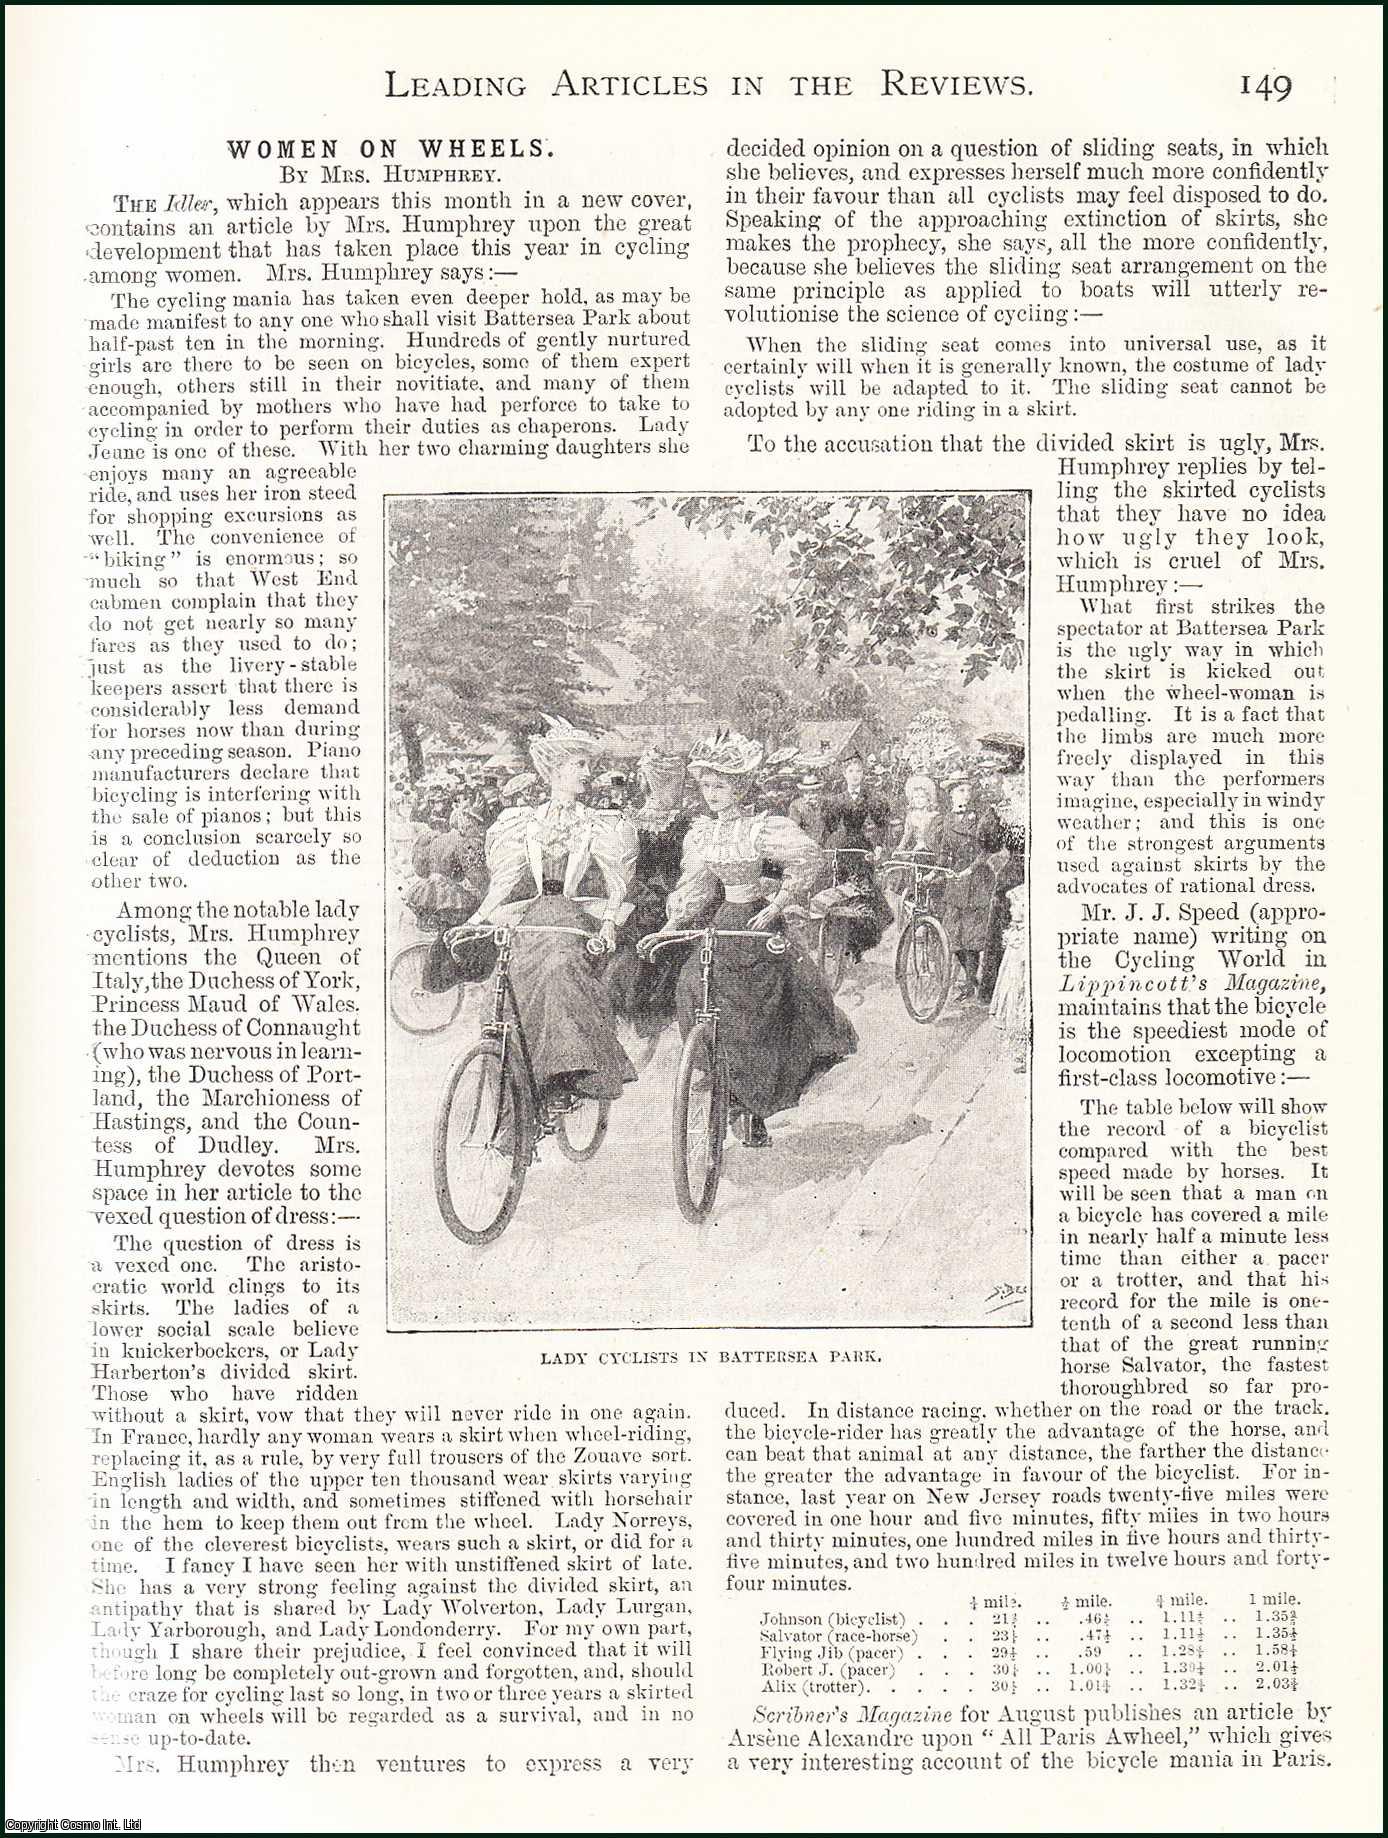 Mrs. Humphrey - Women on Wheels : lady cyclists. An original article from the Review of Reviews, 1895.